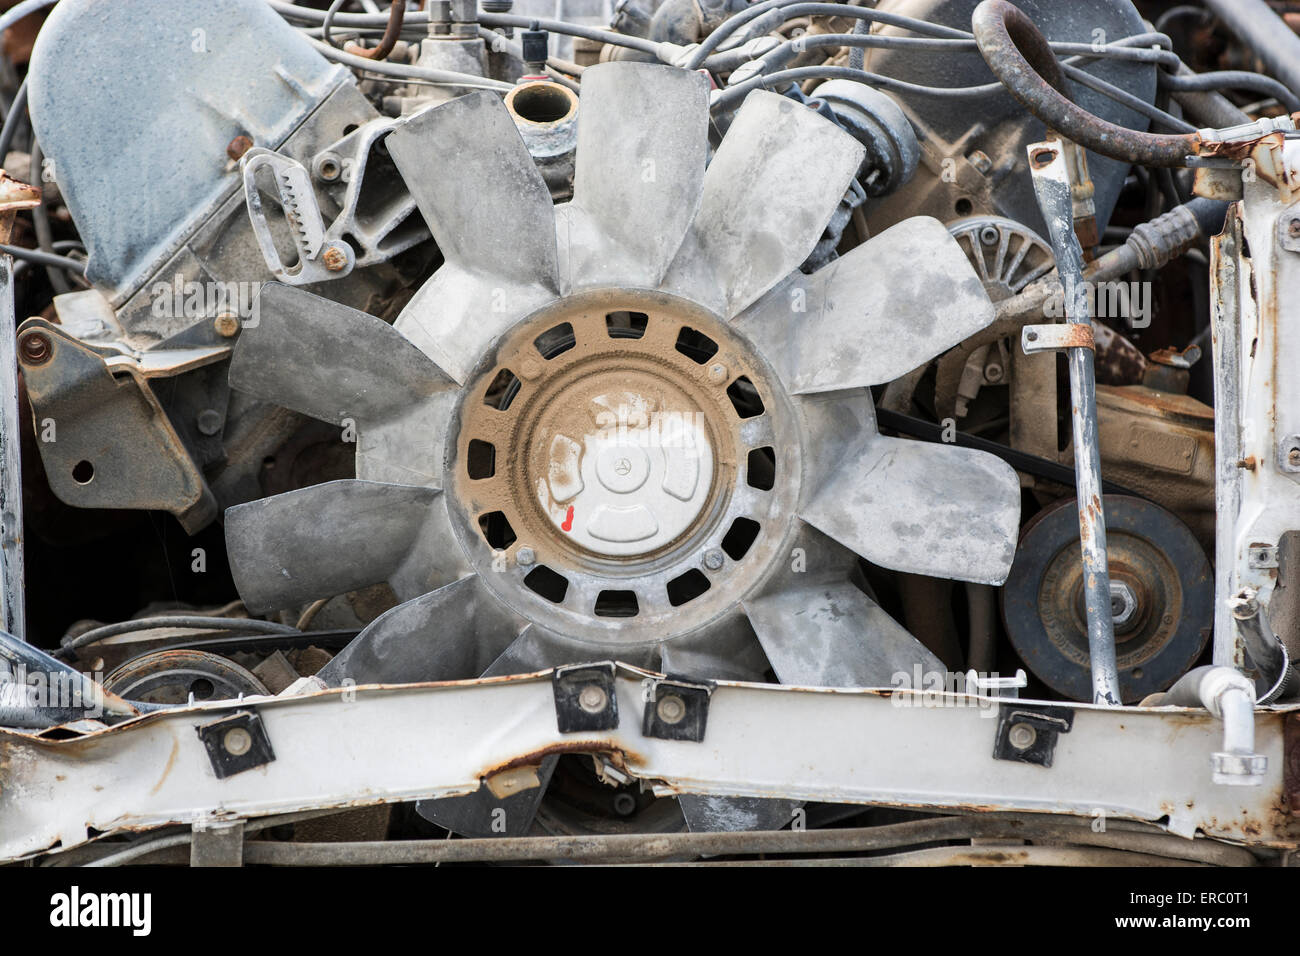 An old motor from a junked car found out in the dessert, Southern California. Stock Photo